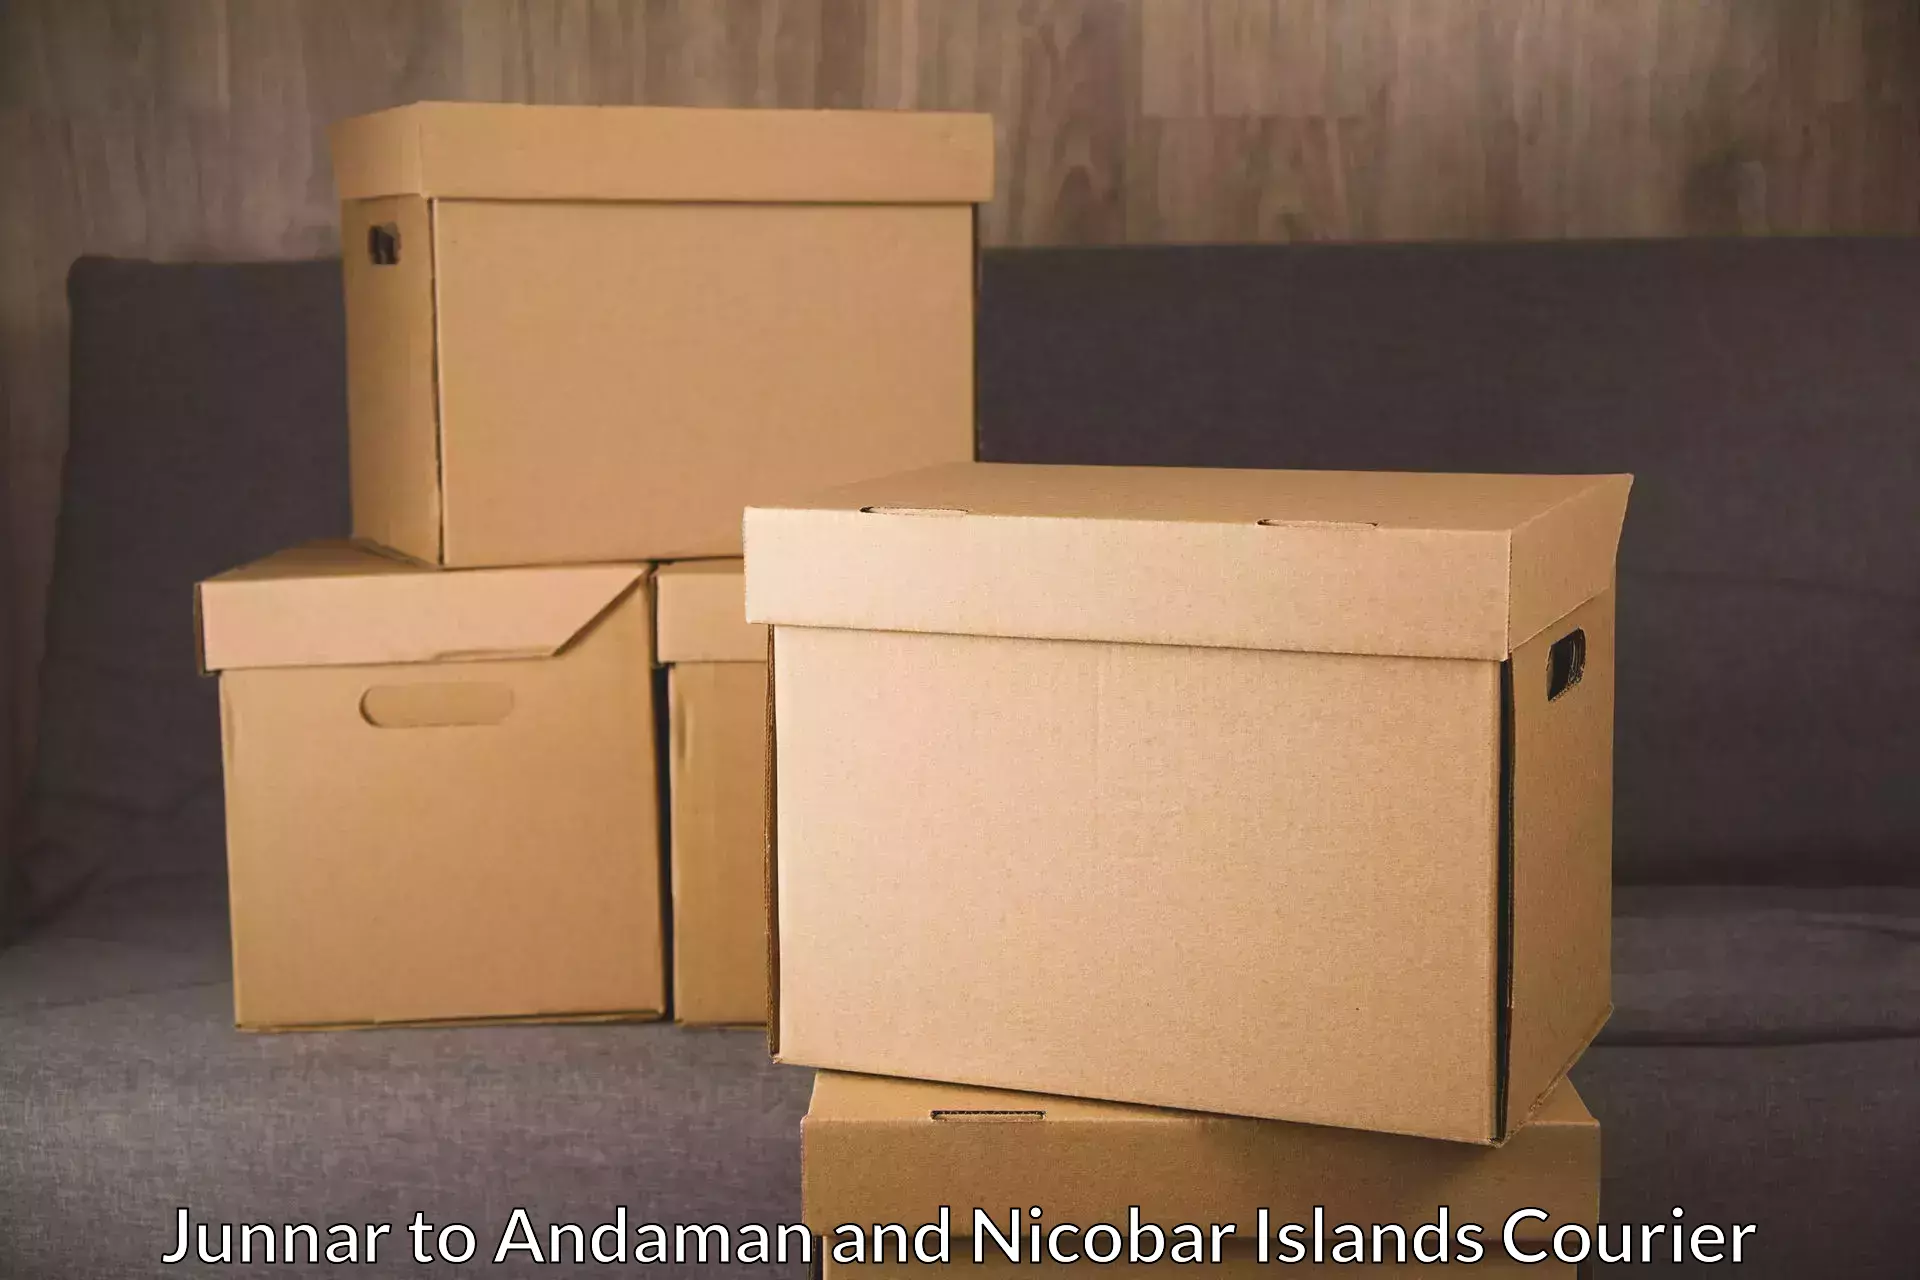 Full-service courier options Junnar to Port Blair